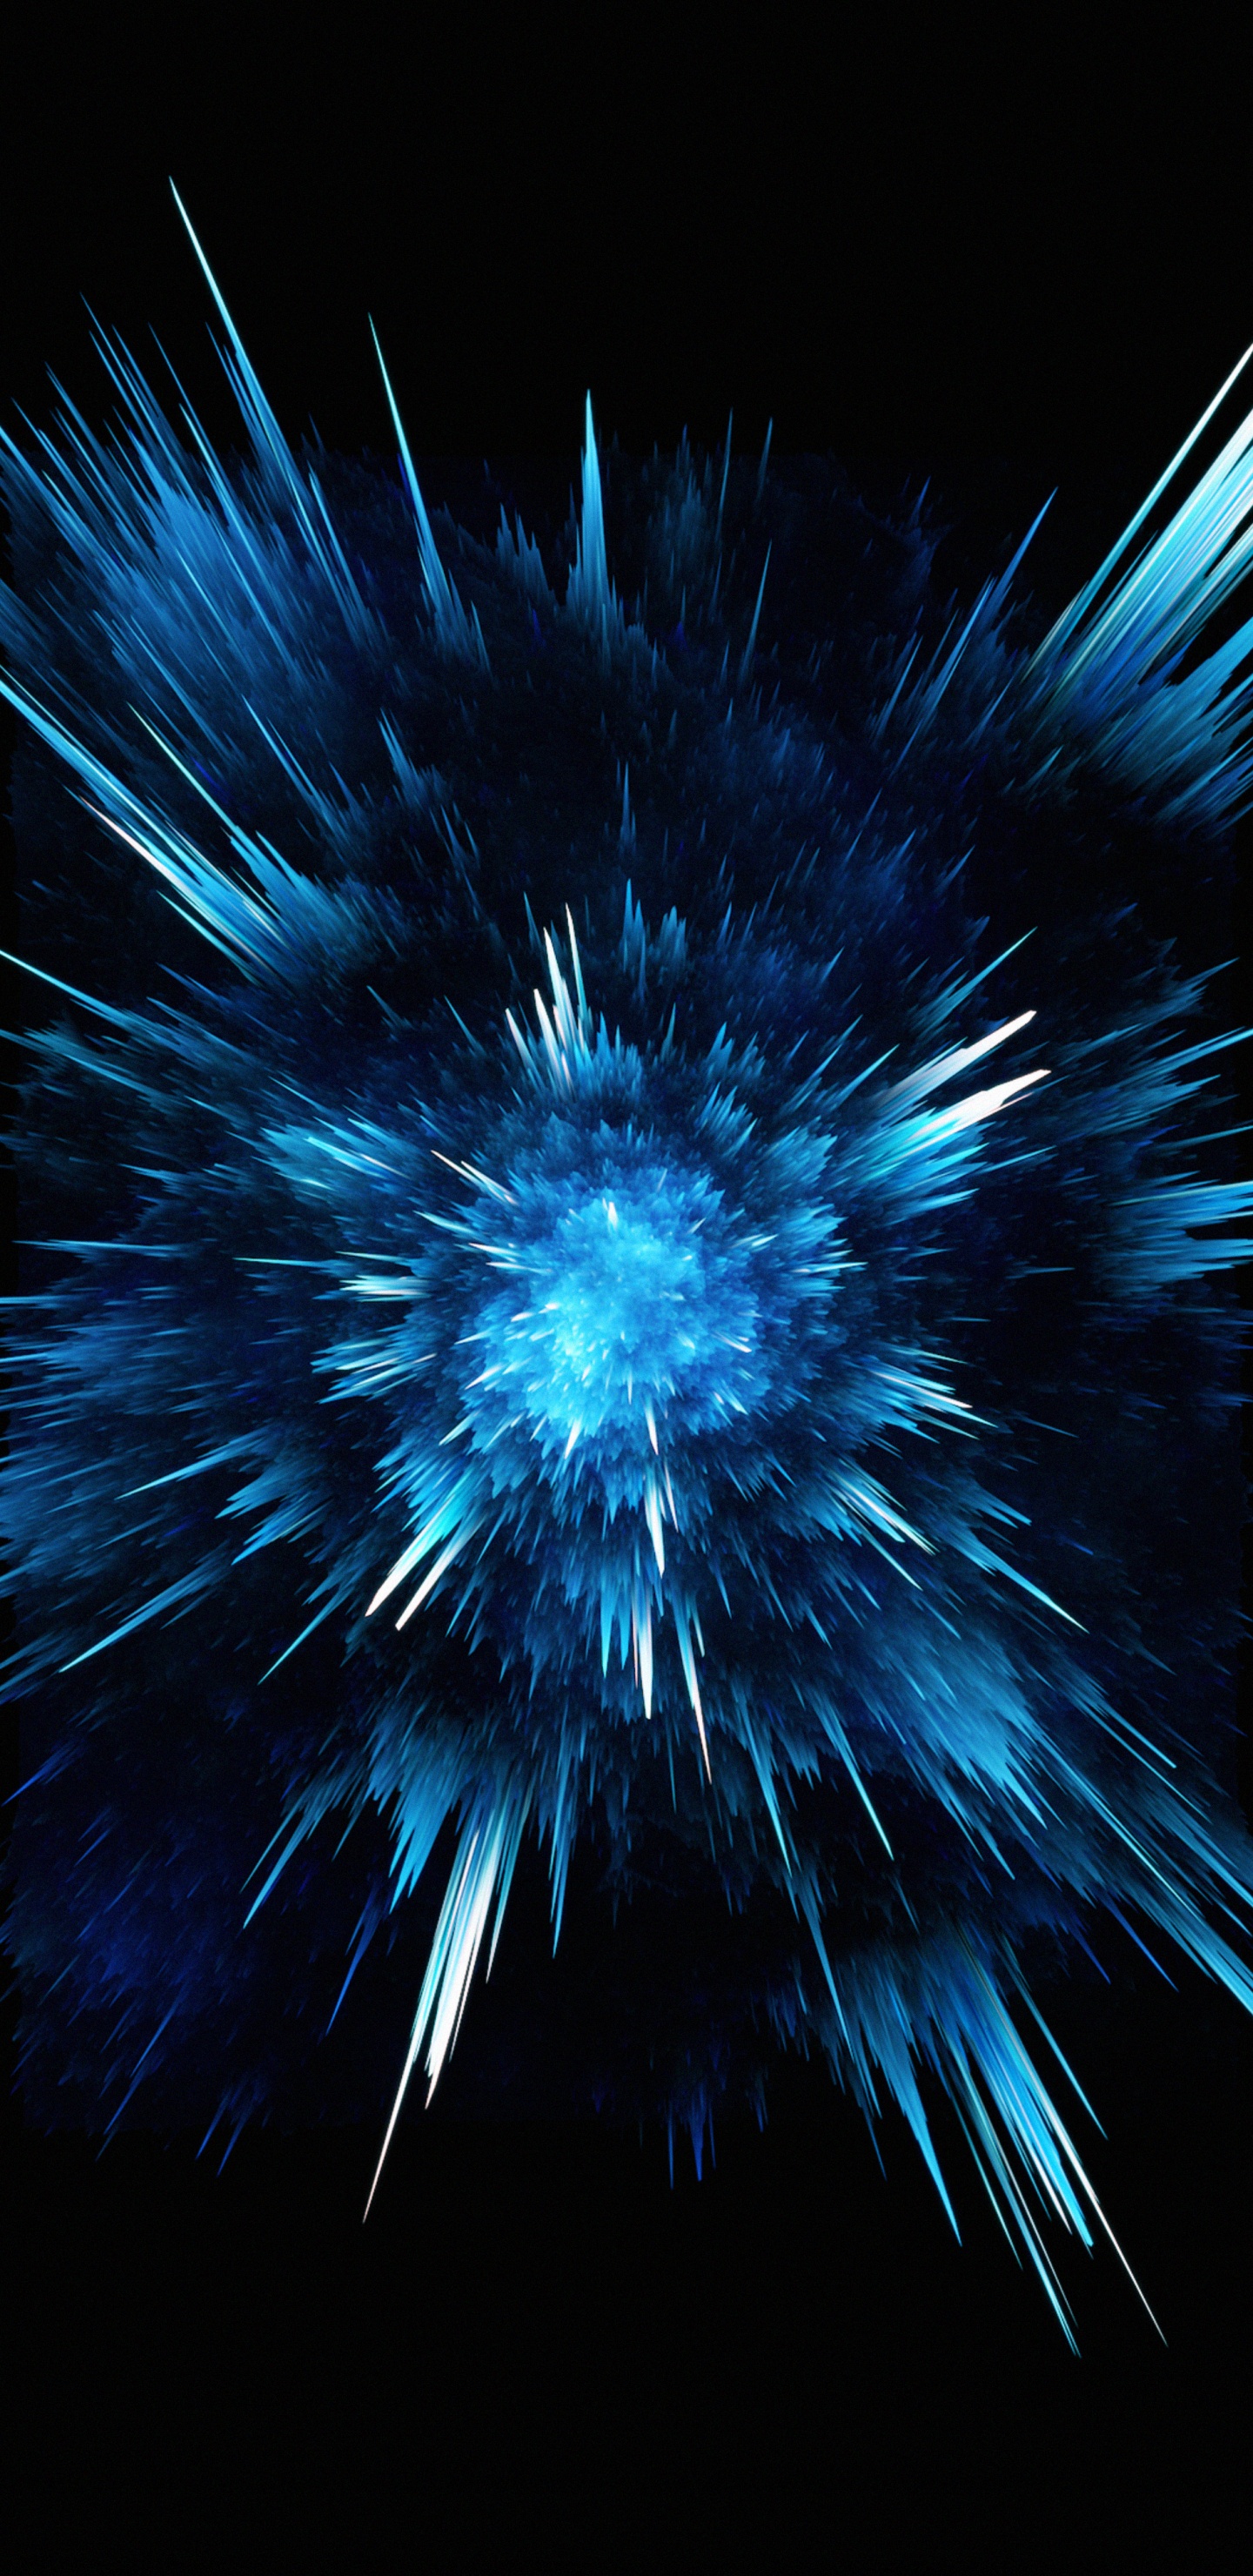 Blue and White Light on Black Background. Wallpaper in 1440x2960 Resolution